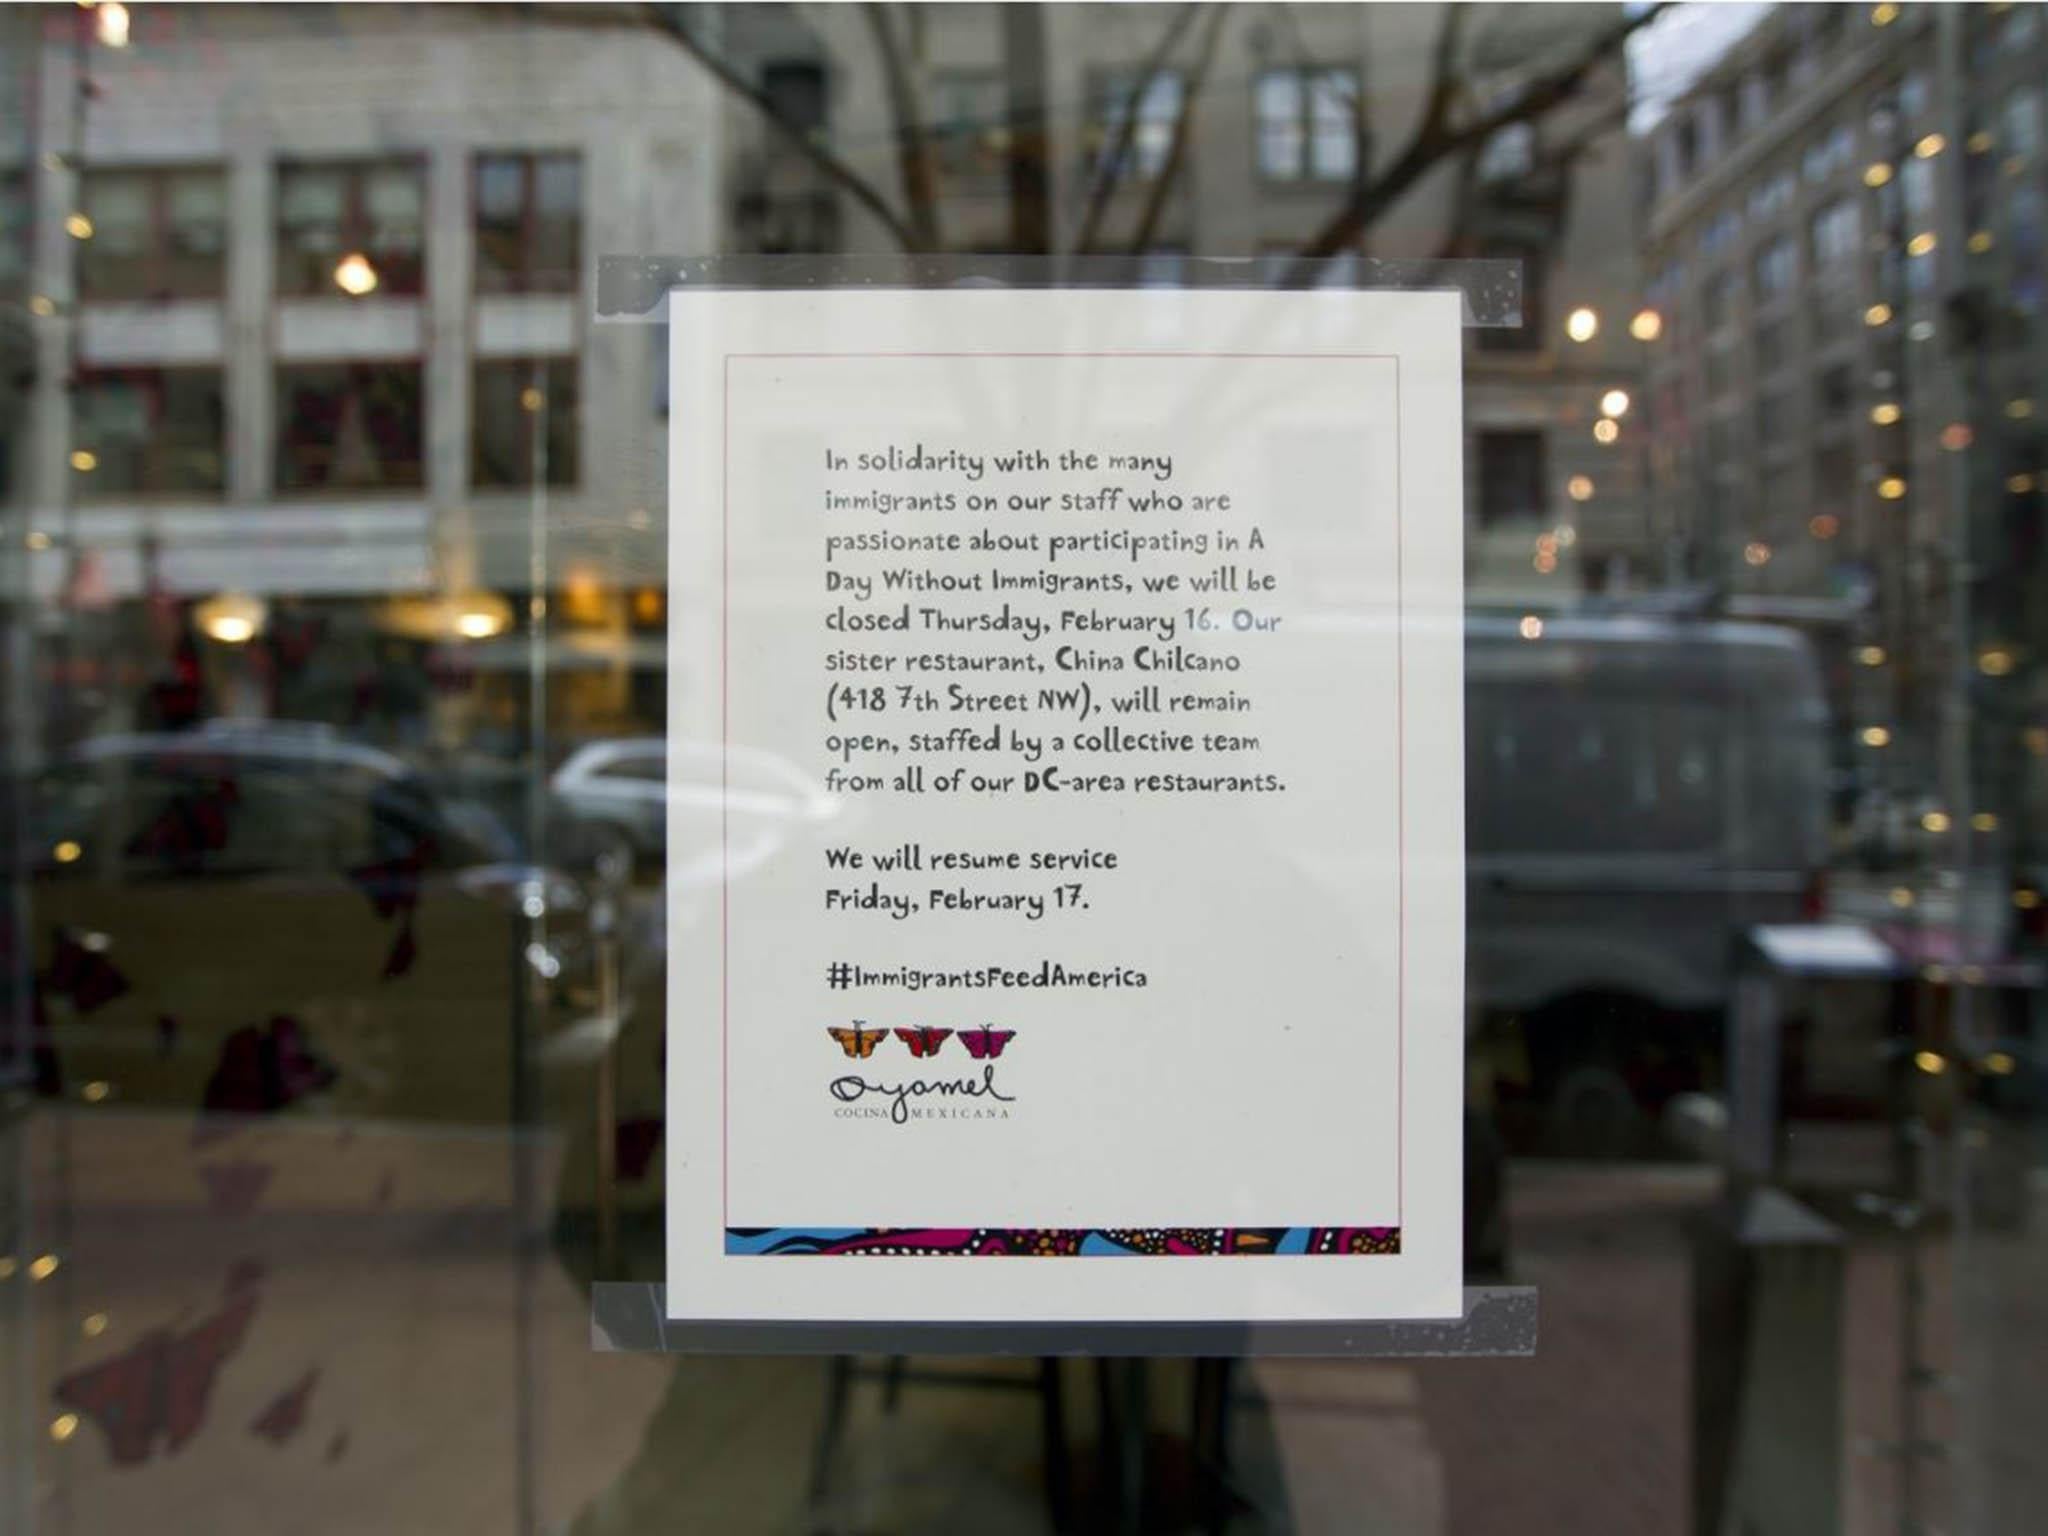 A flier on the window of Oyamel in Washington explains the closure (AP)